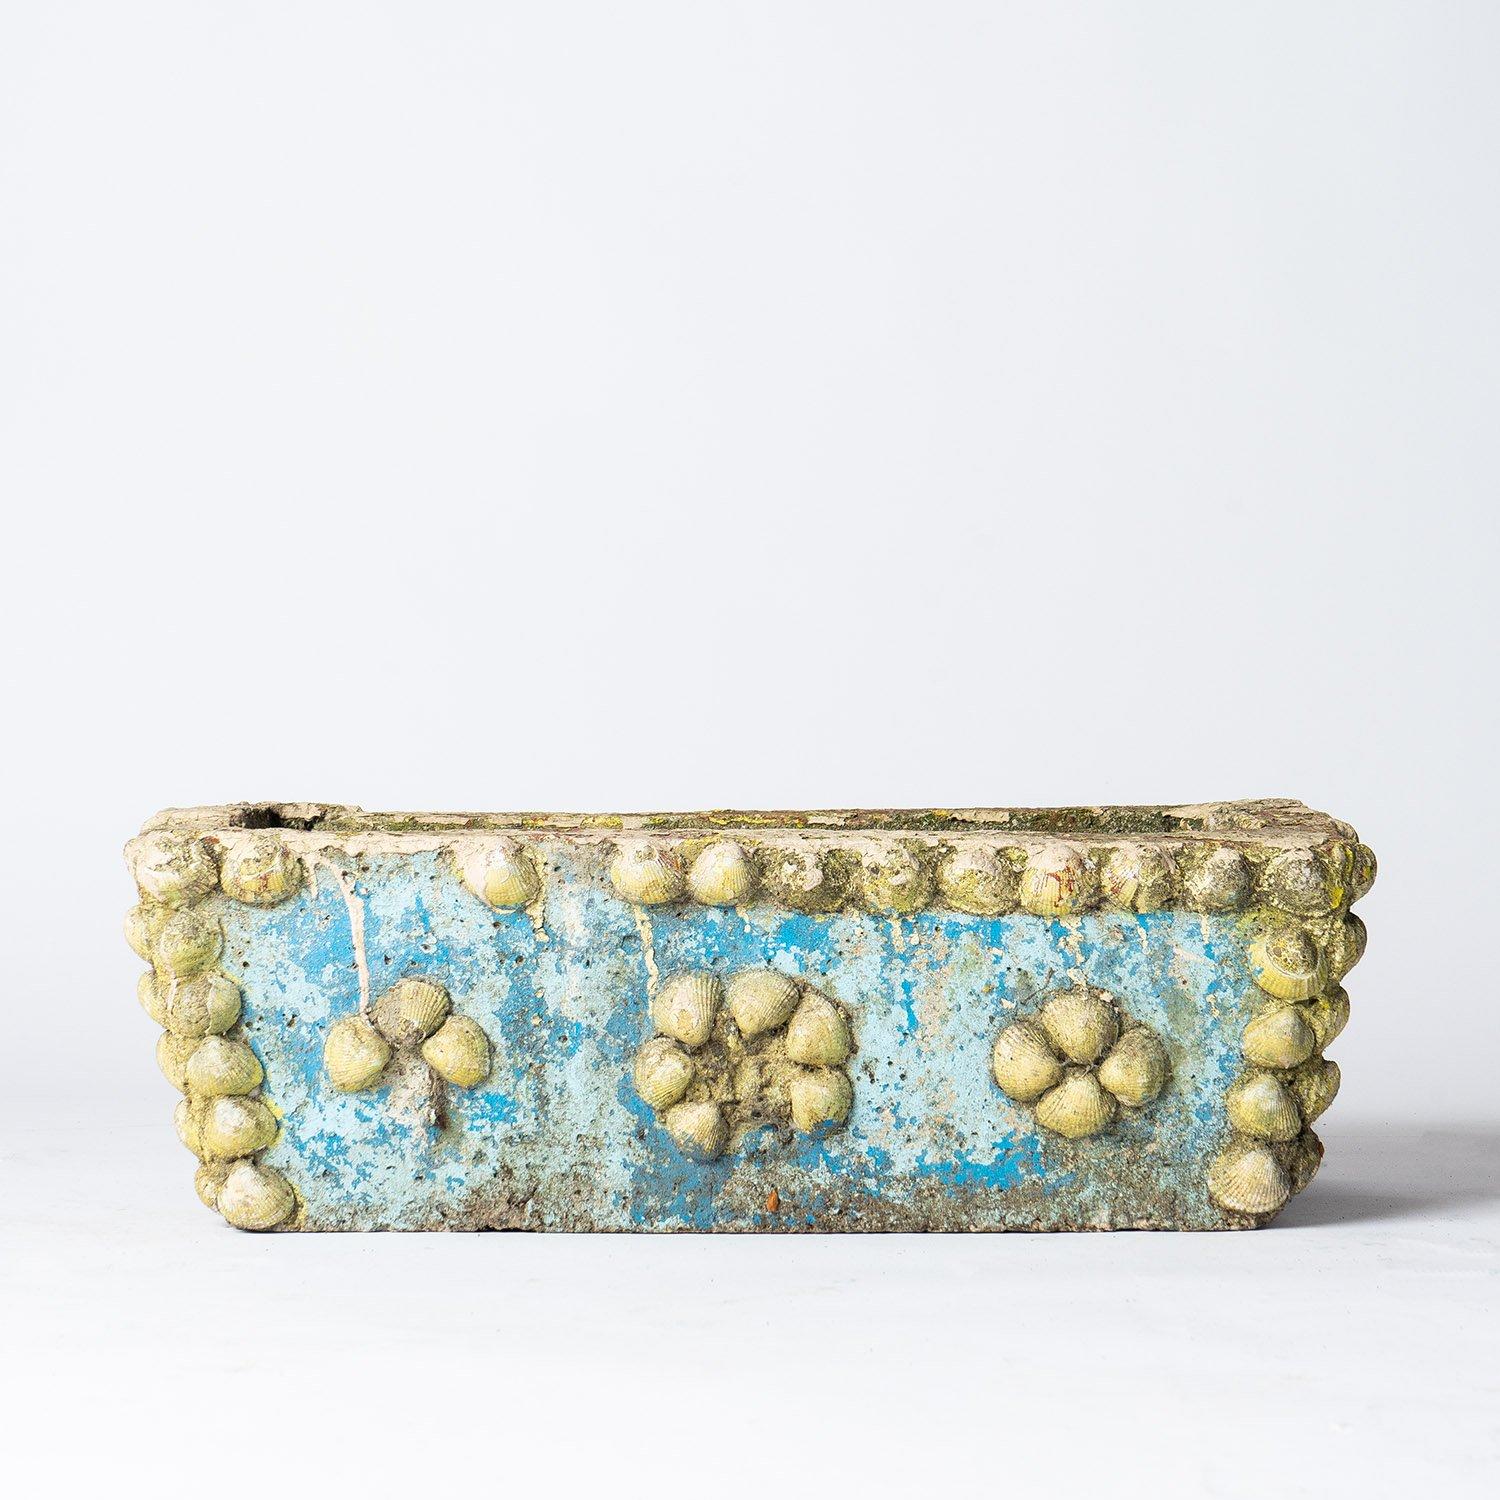 Vintage Hand Decorated Reconstituted Stone Plant Pot

A thick heavy planter in the form of a trough with remnants of original paint and applied clam shell decoration.

Originally made to be used outside but could also be used in an interior